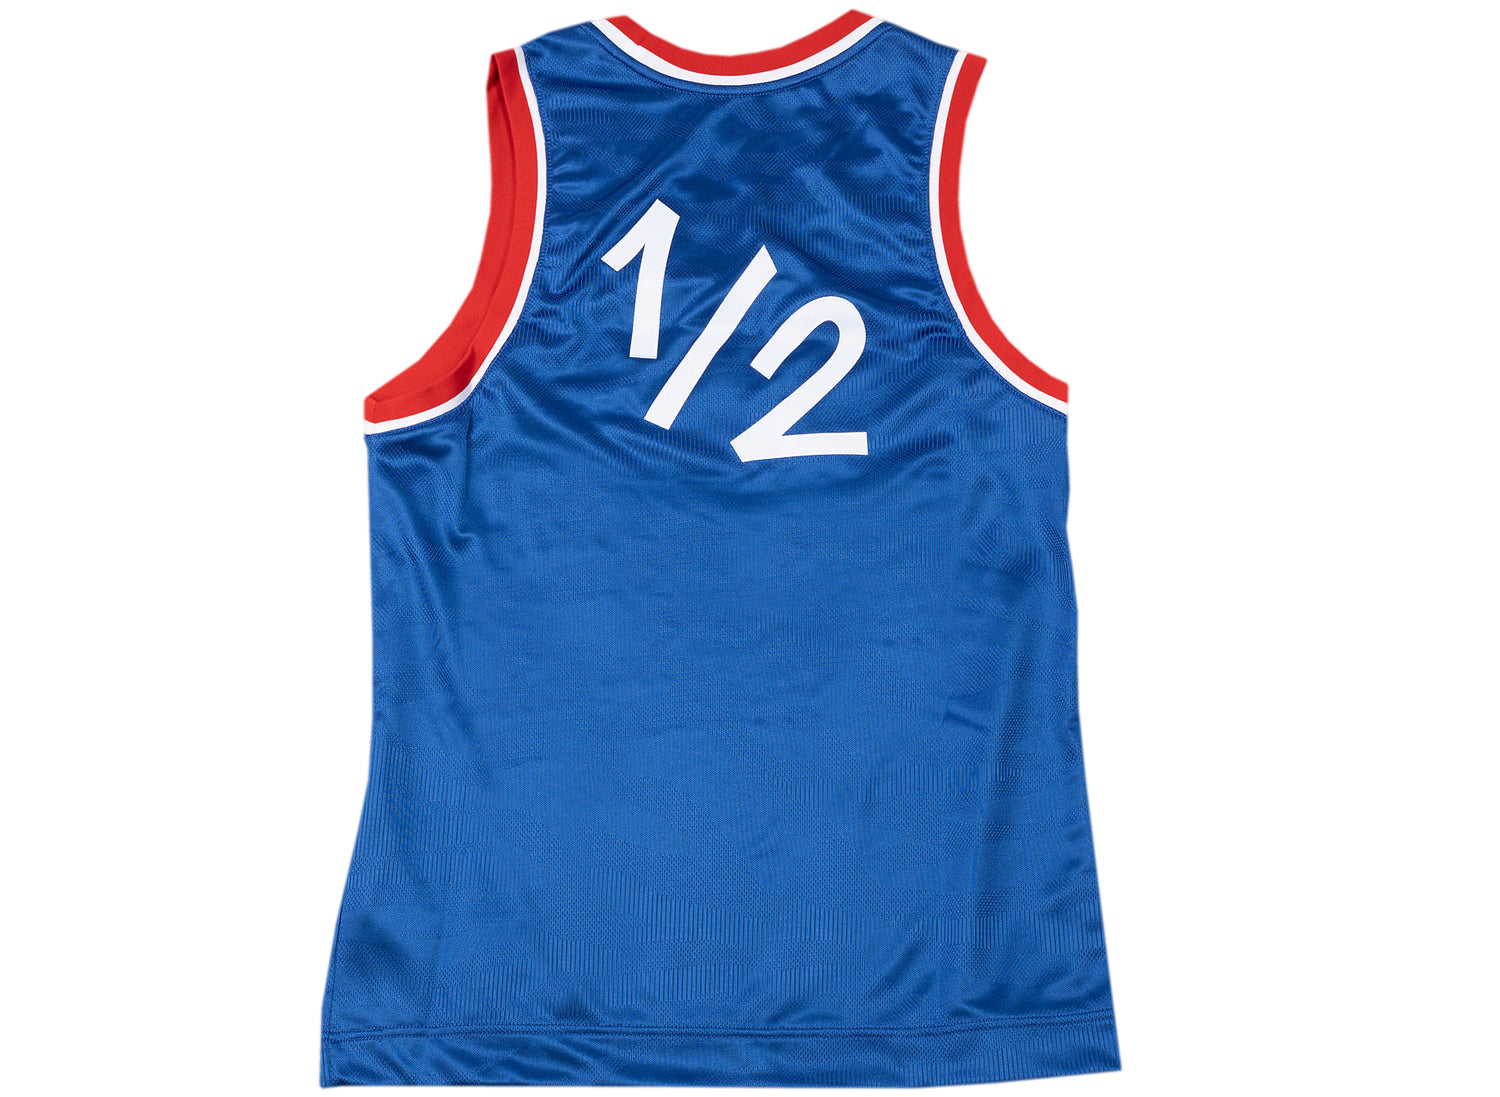 Lil Penny Throwback Custom Basketball Jersey (White) 3XL